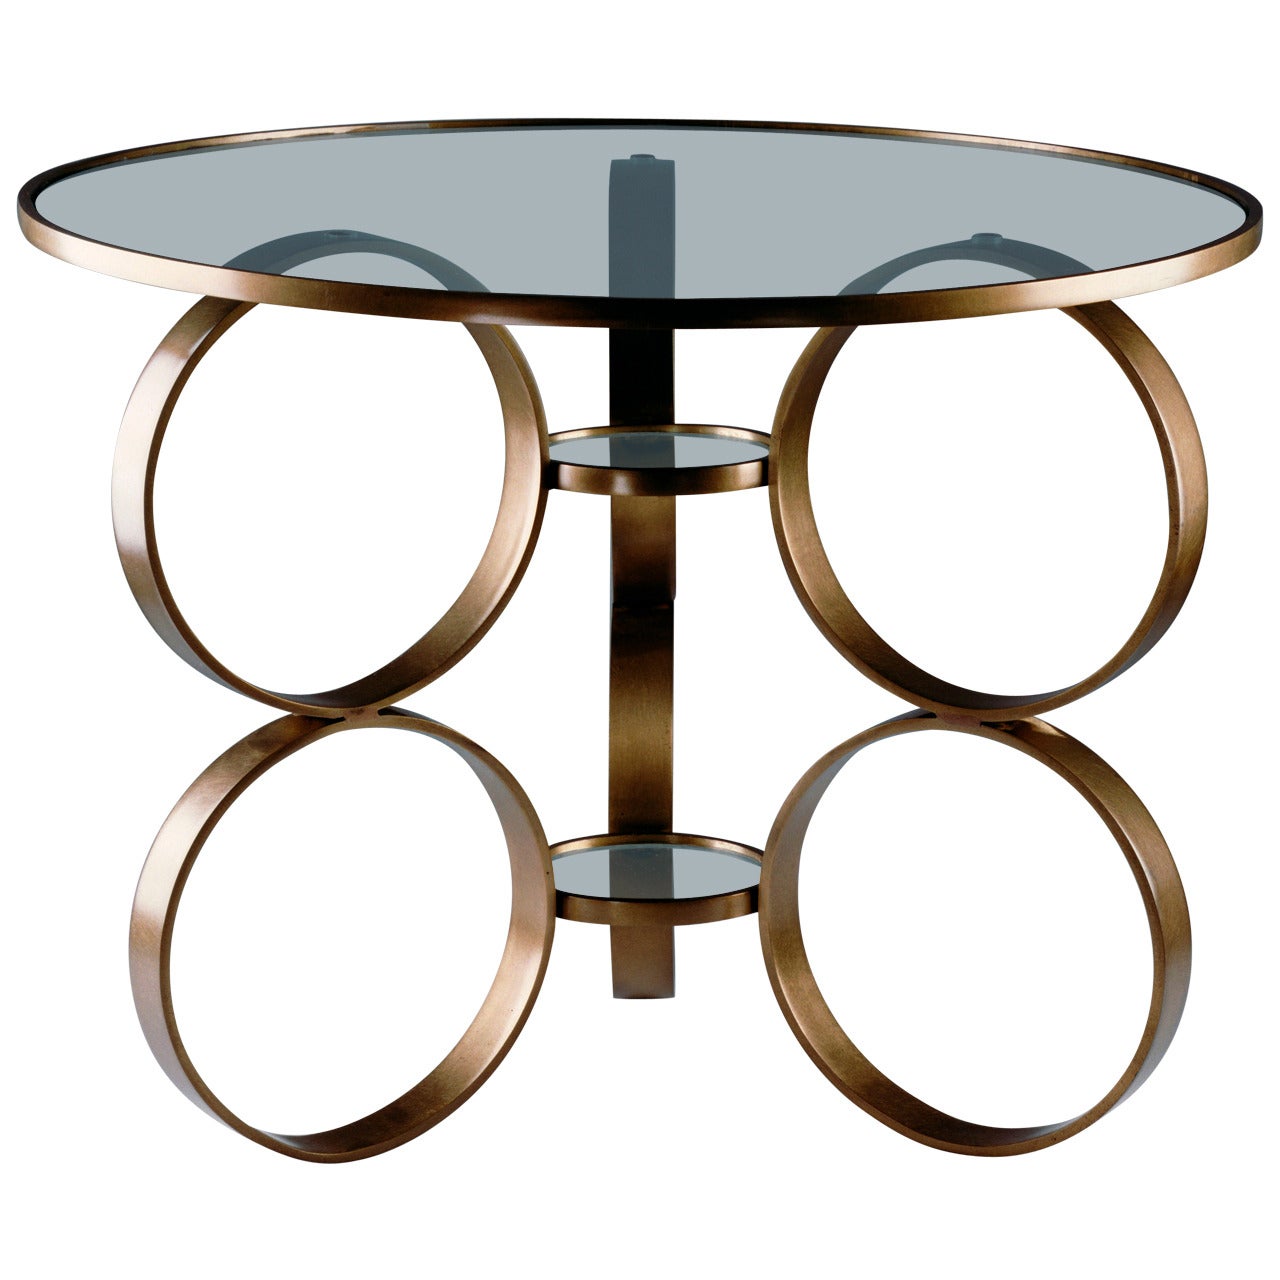 Brass Ring Table Designed by Laurie Beckerman